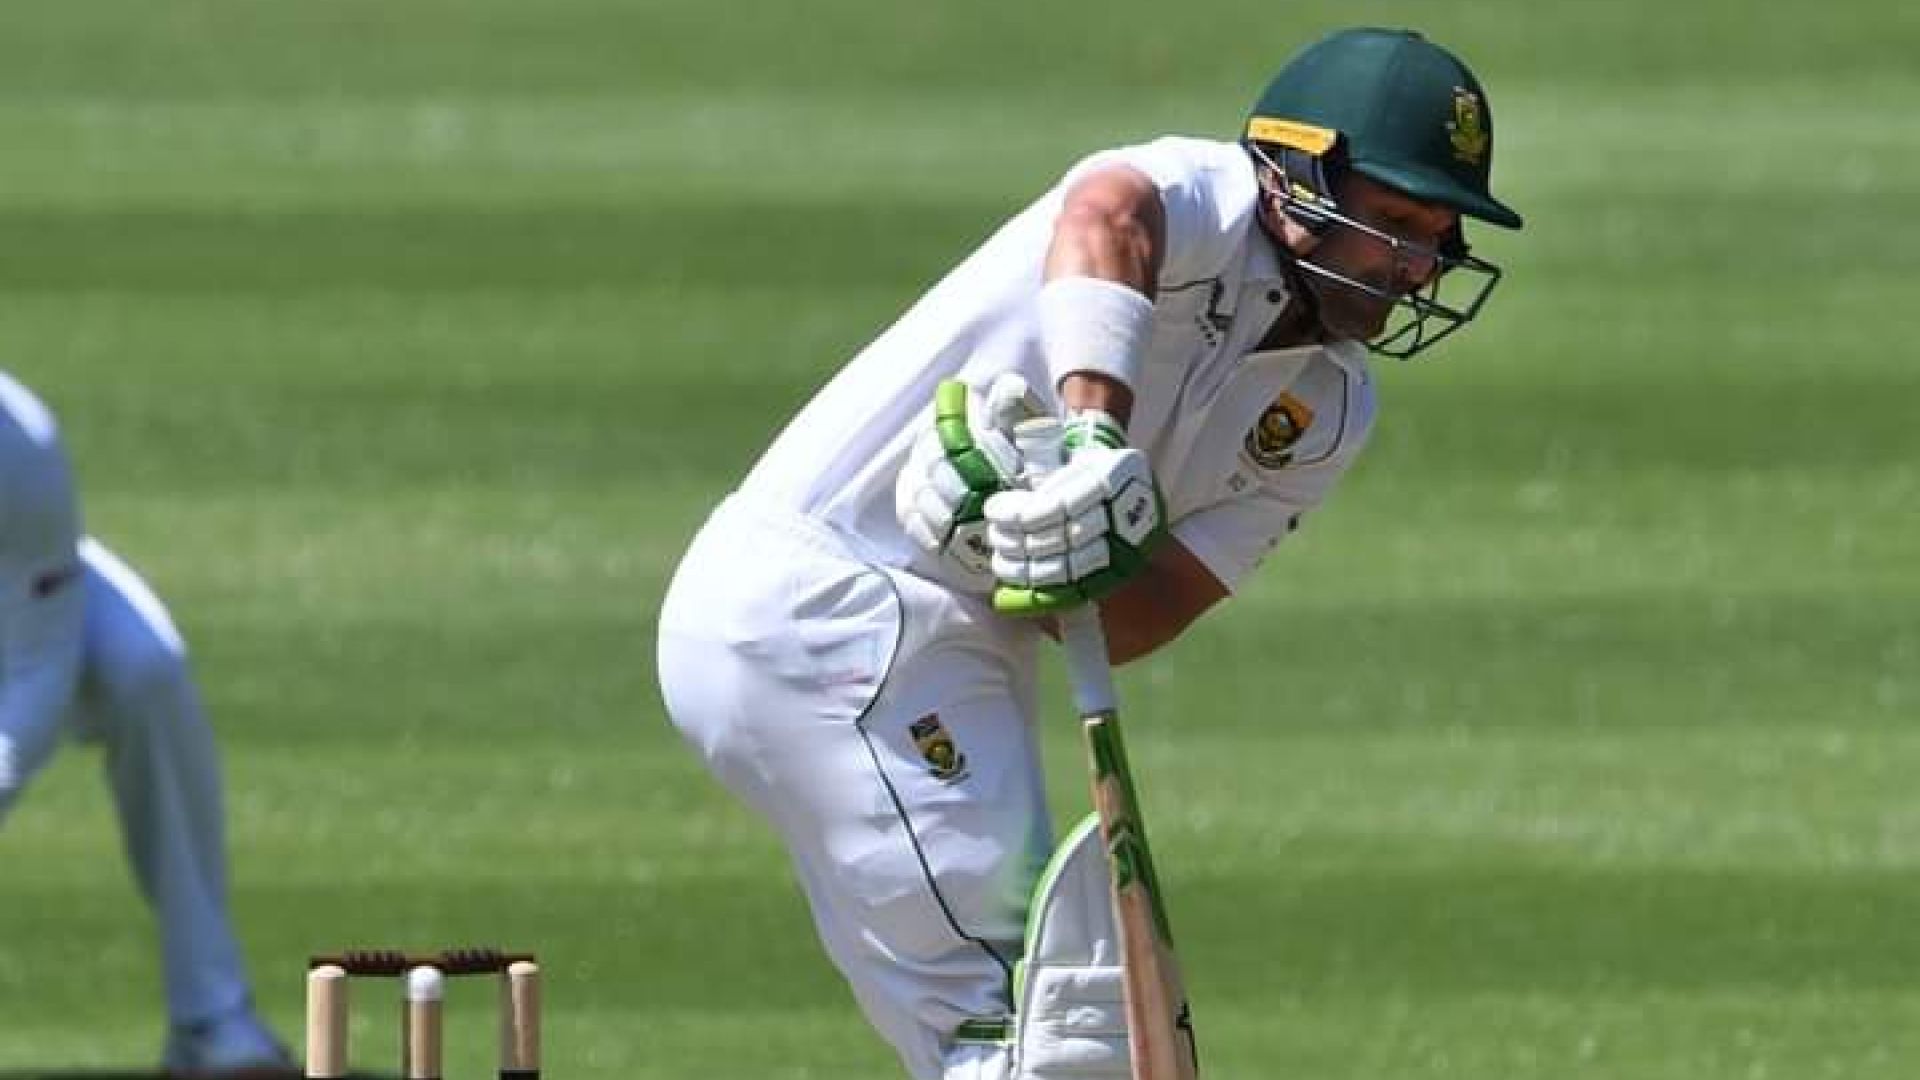 ICC Rankings | Elgar, Jamieson enter top 10 of Test batting and bowling lists respectively